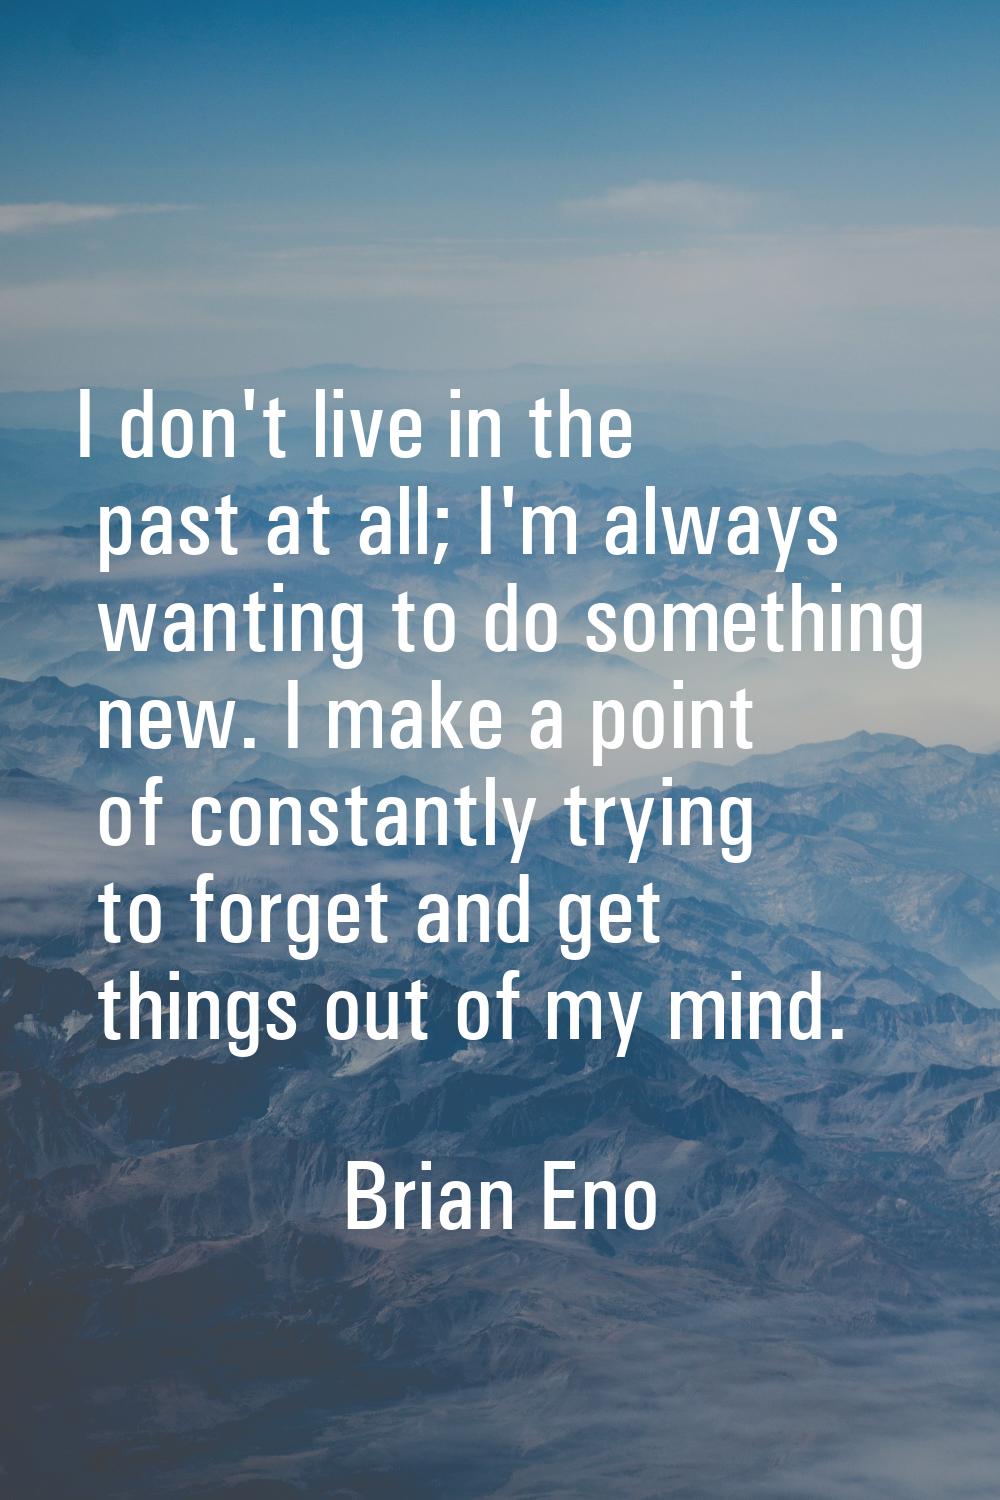 I don't live in the past at all; I'm always wanting to do something new. I make a point of constant